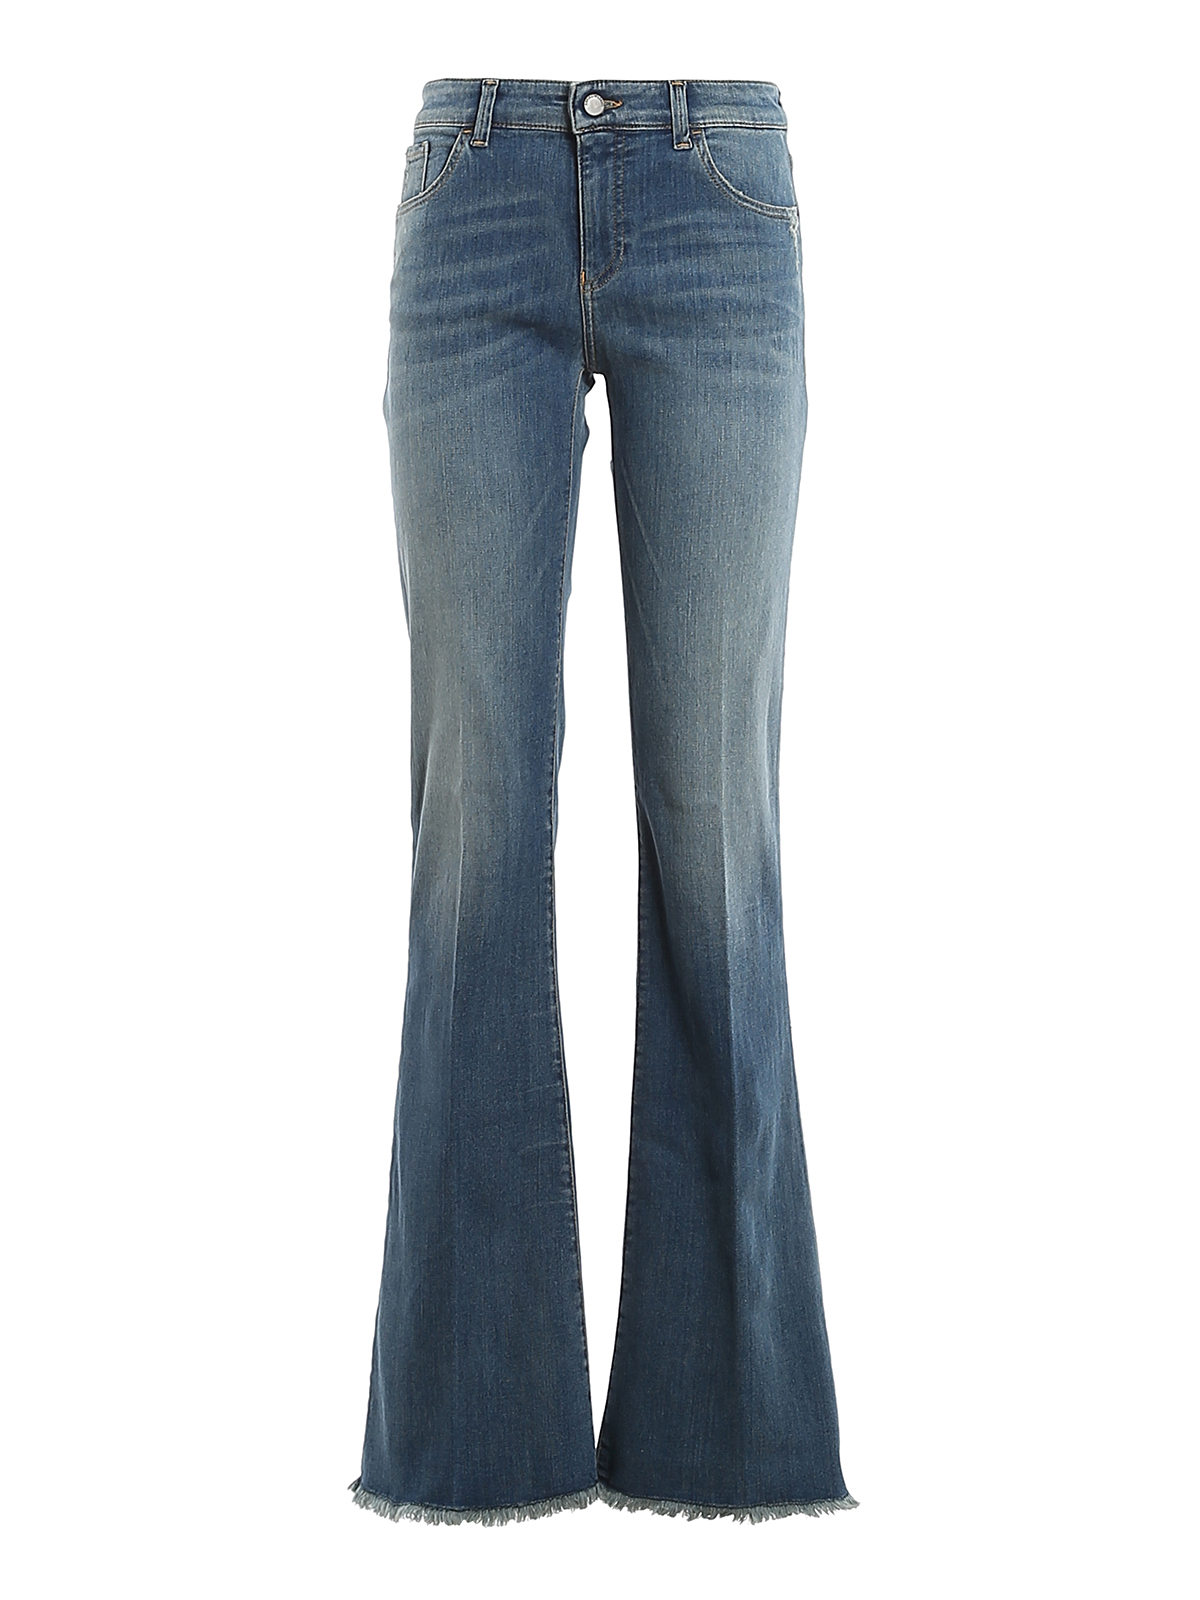 EMPORIO ARMANI USED EFFECT REGULAR FIT JEANS